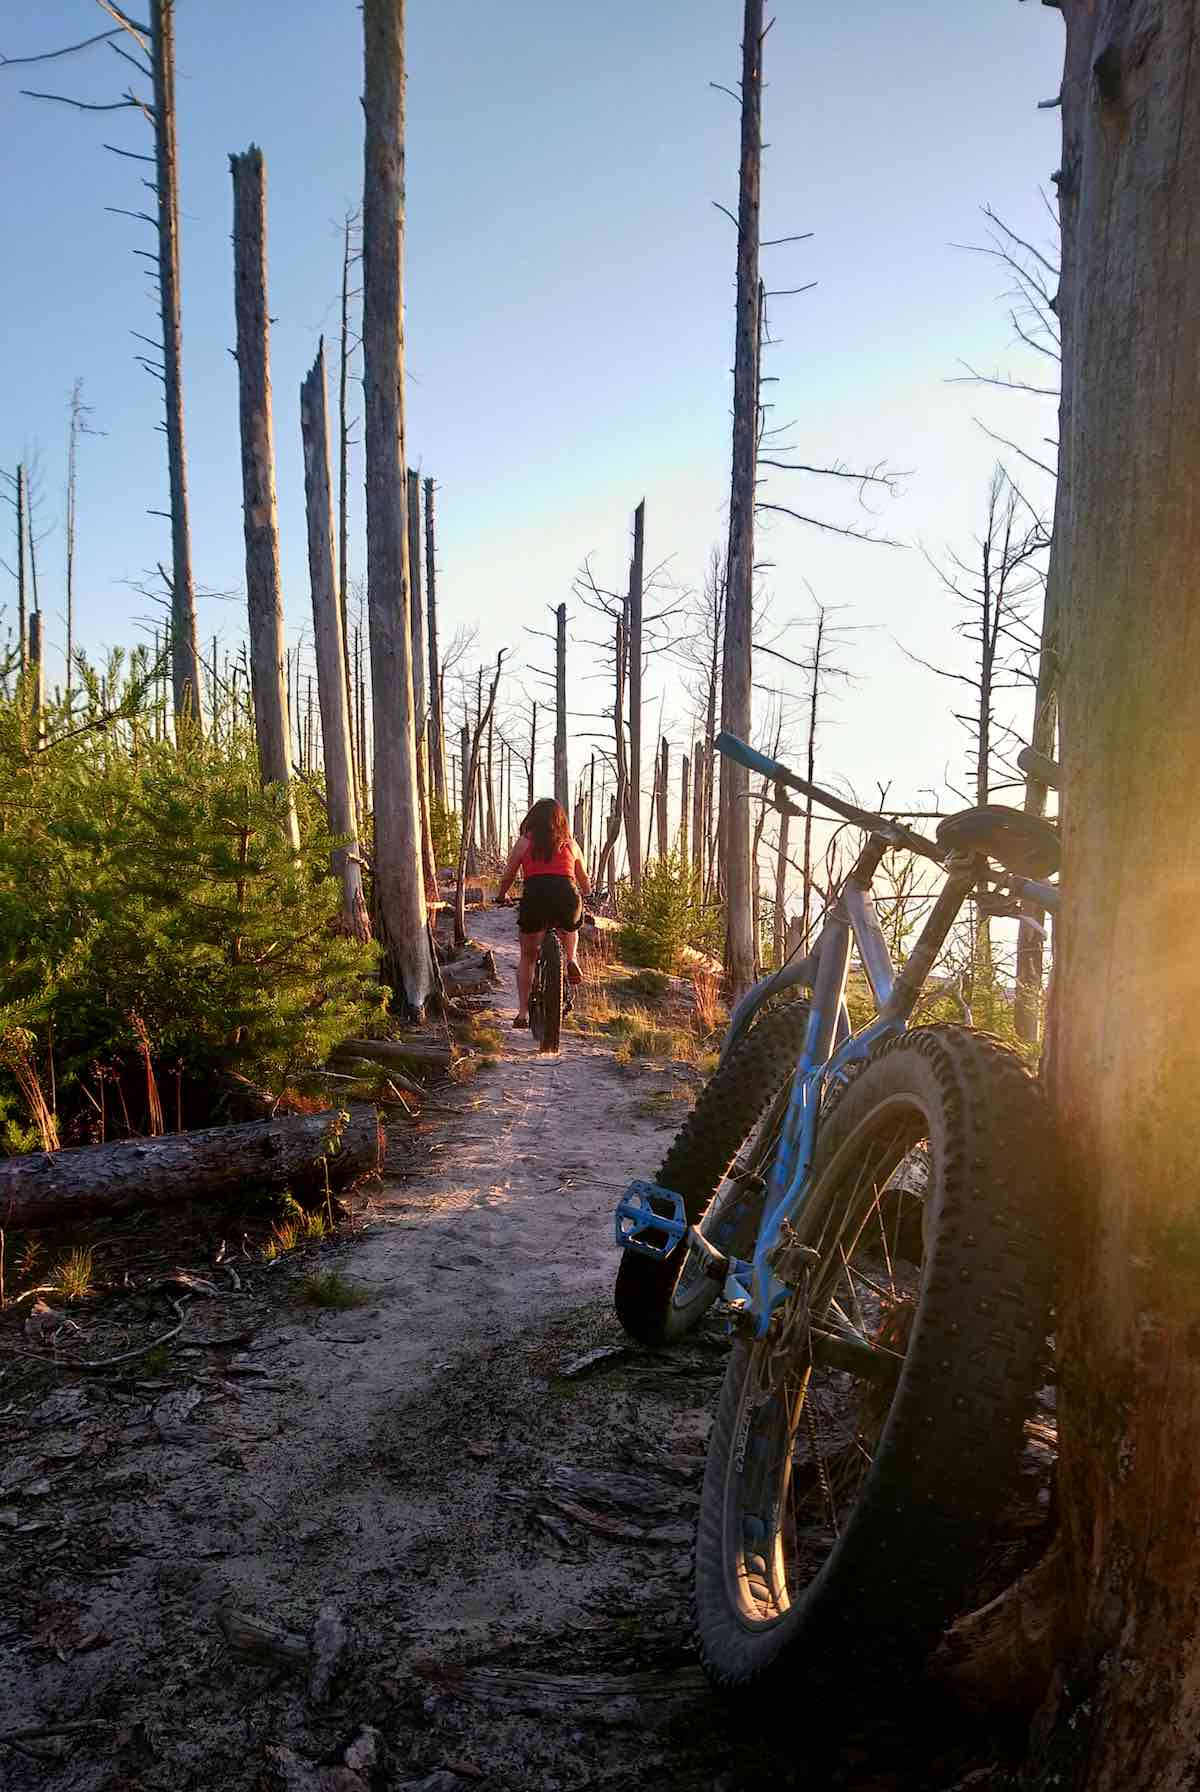 bikerumor pic of the day a fat bike rider on a sandy trail is centered in the photo with burnt tree trunks surrounding and scrub brush below the sun is low and golden and there is a fat bike leaning against a tree trunk in the front of the photo.